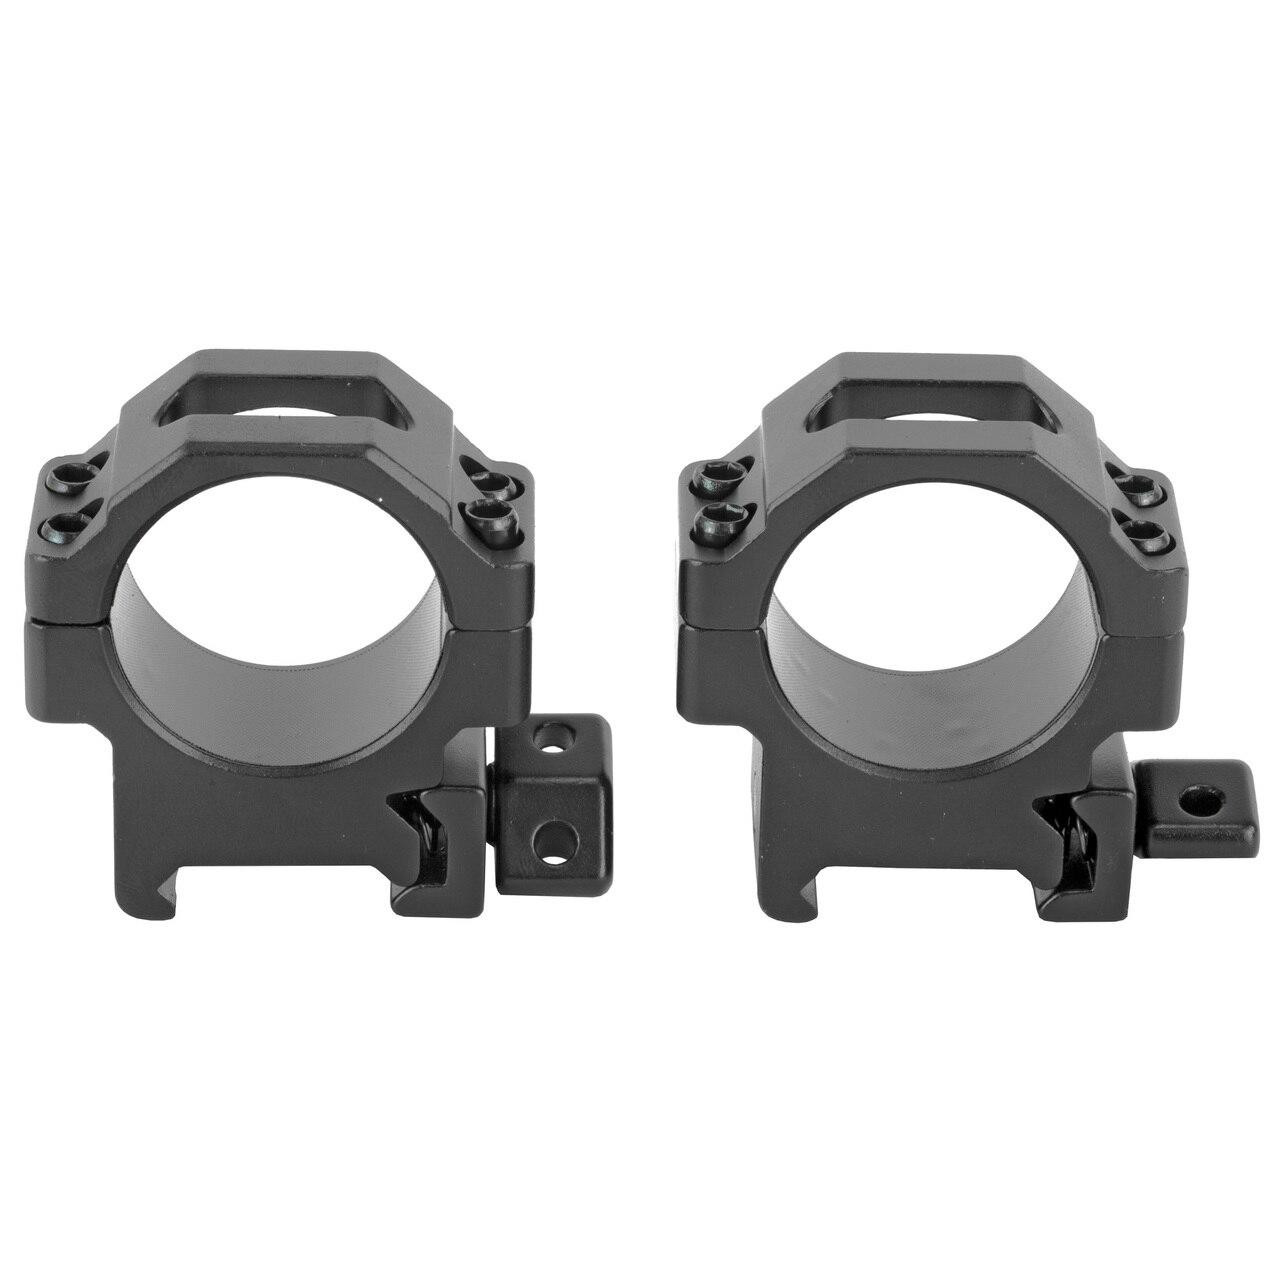 Leapers, Inc - UTG Utg Pro Max 30mm Low 2pc Pctnny Rngs 4712274527553